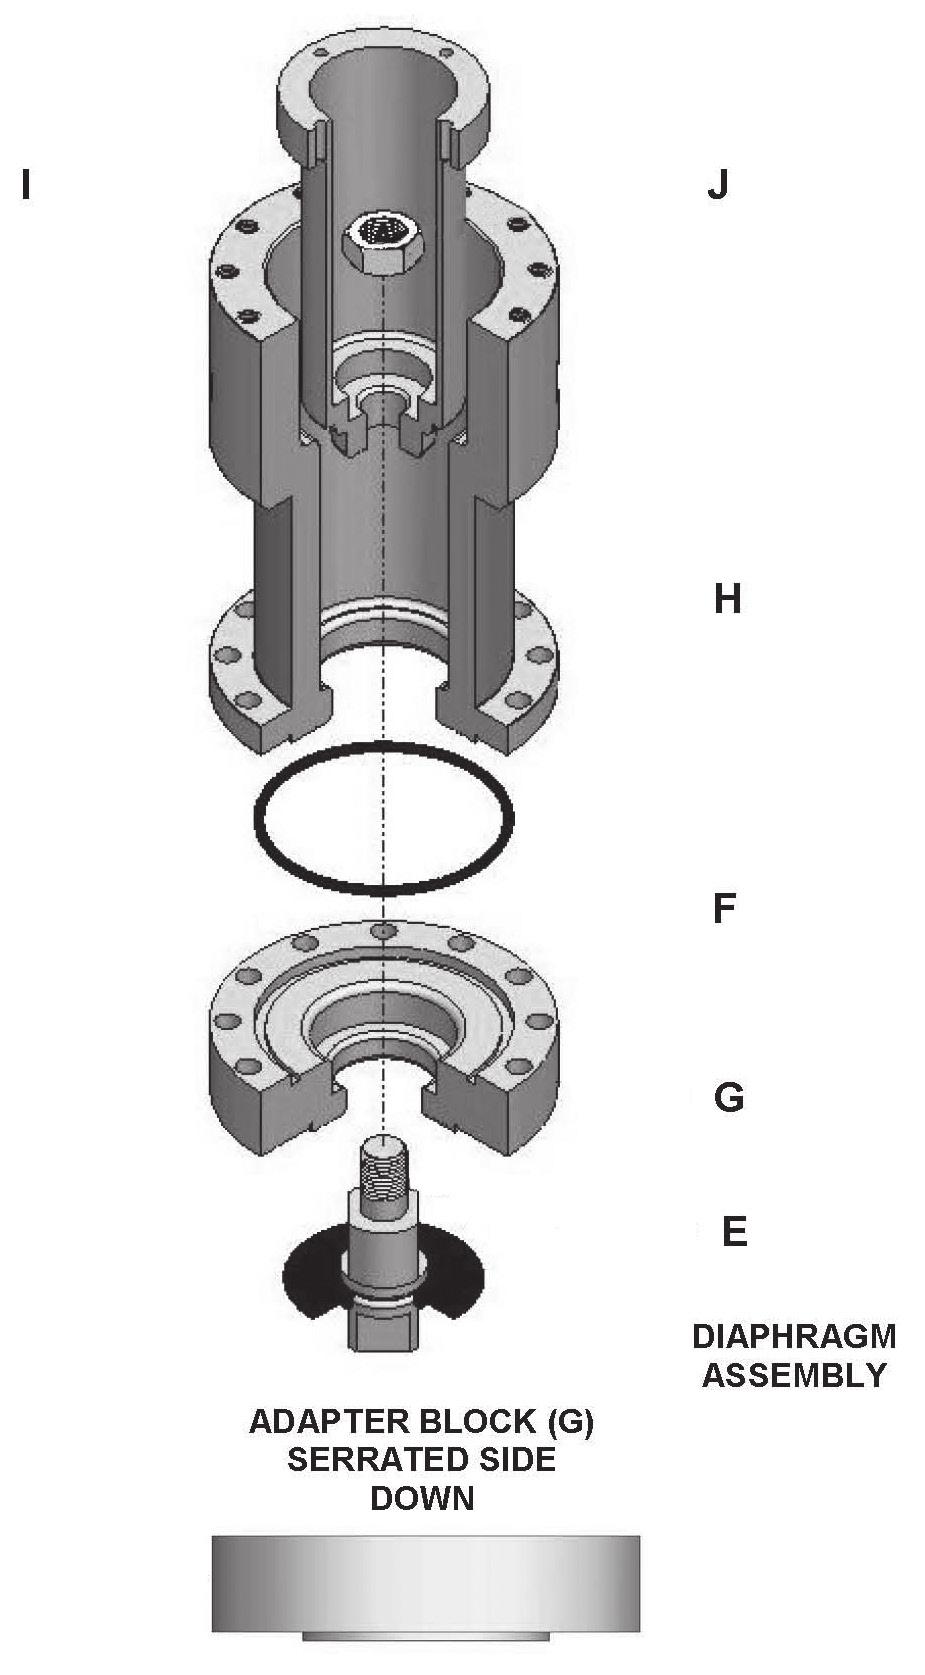 1000-1500-CH Chamber Assemblies Assembling the Diaphragm 1000/1500-CH Diaphragm Assembly Slide 012 O-ring (A) onto the small piston (B). Place the diaphragm with hole (C) onto the piston (B).